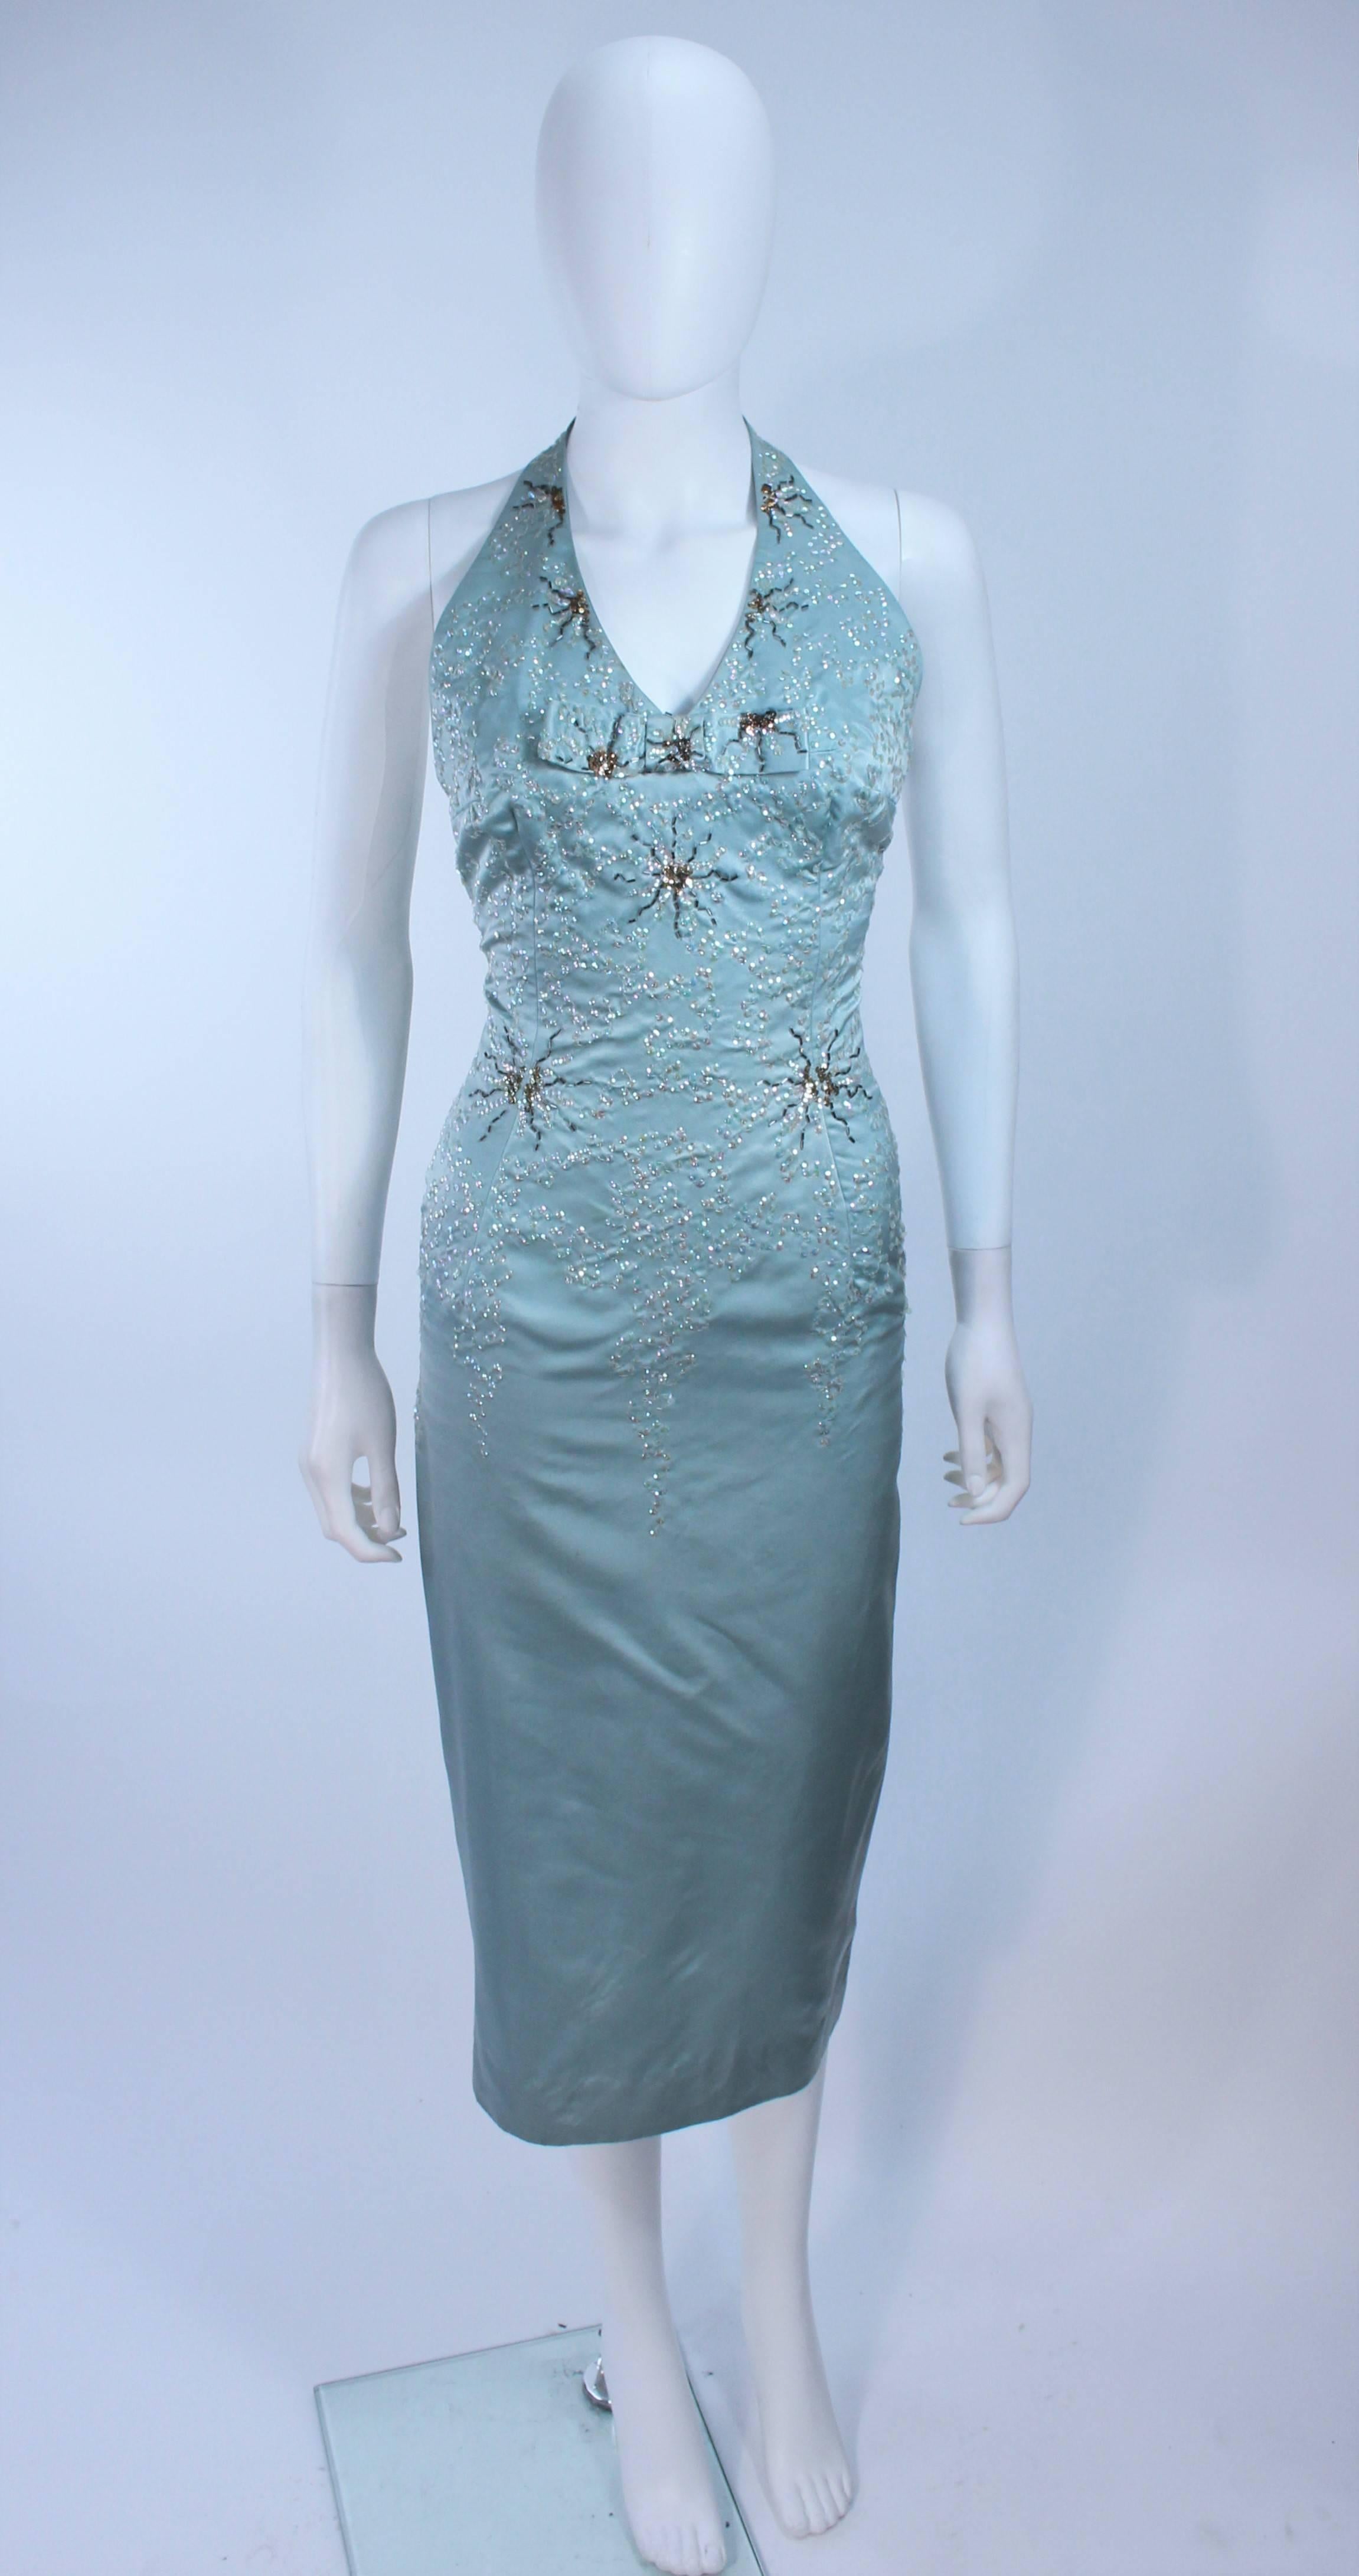  This cocktail dress is composed of an aqua silk with sequin and bead embellishments. There is a center front bow with zipper closure, and halter style. In great vintage condition.

  **Please cross-reference measurements for personal accuracy.